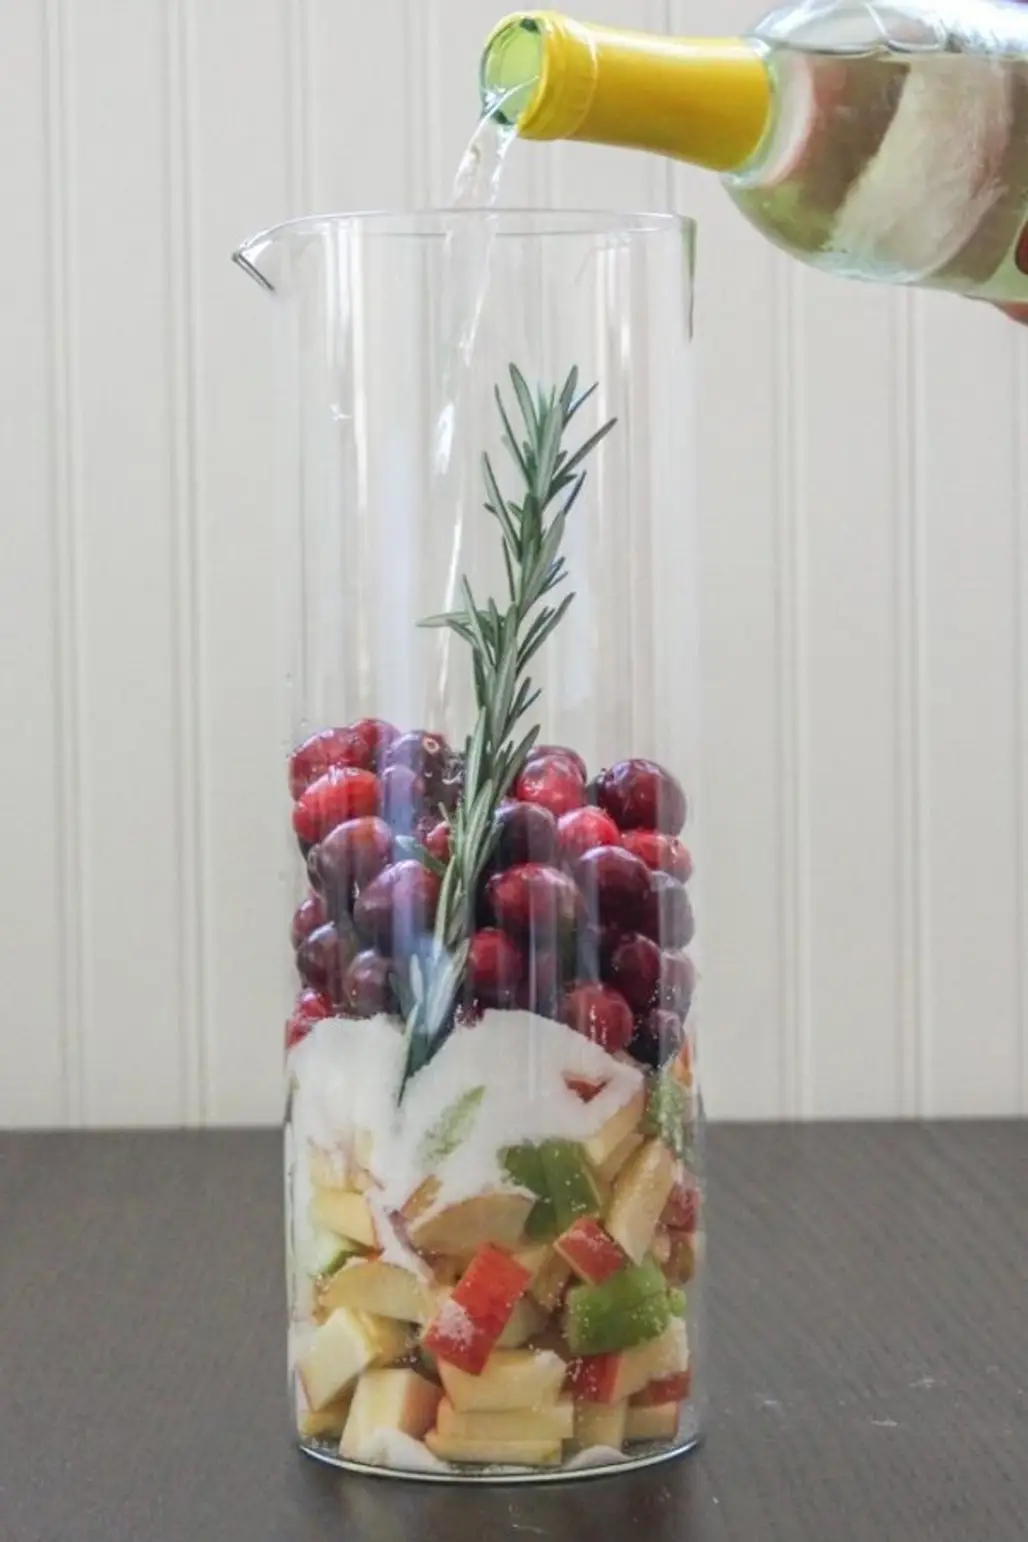 Cranberry and Rosemary White Christmas Sangria